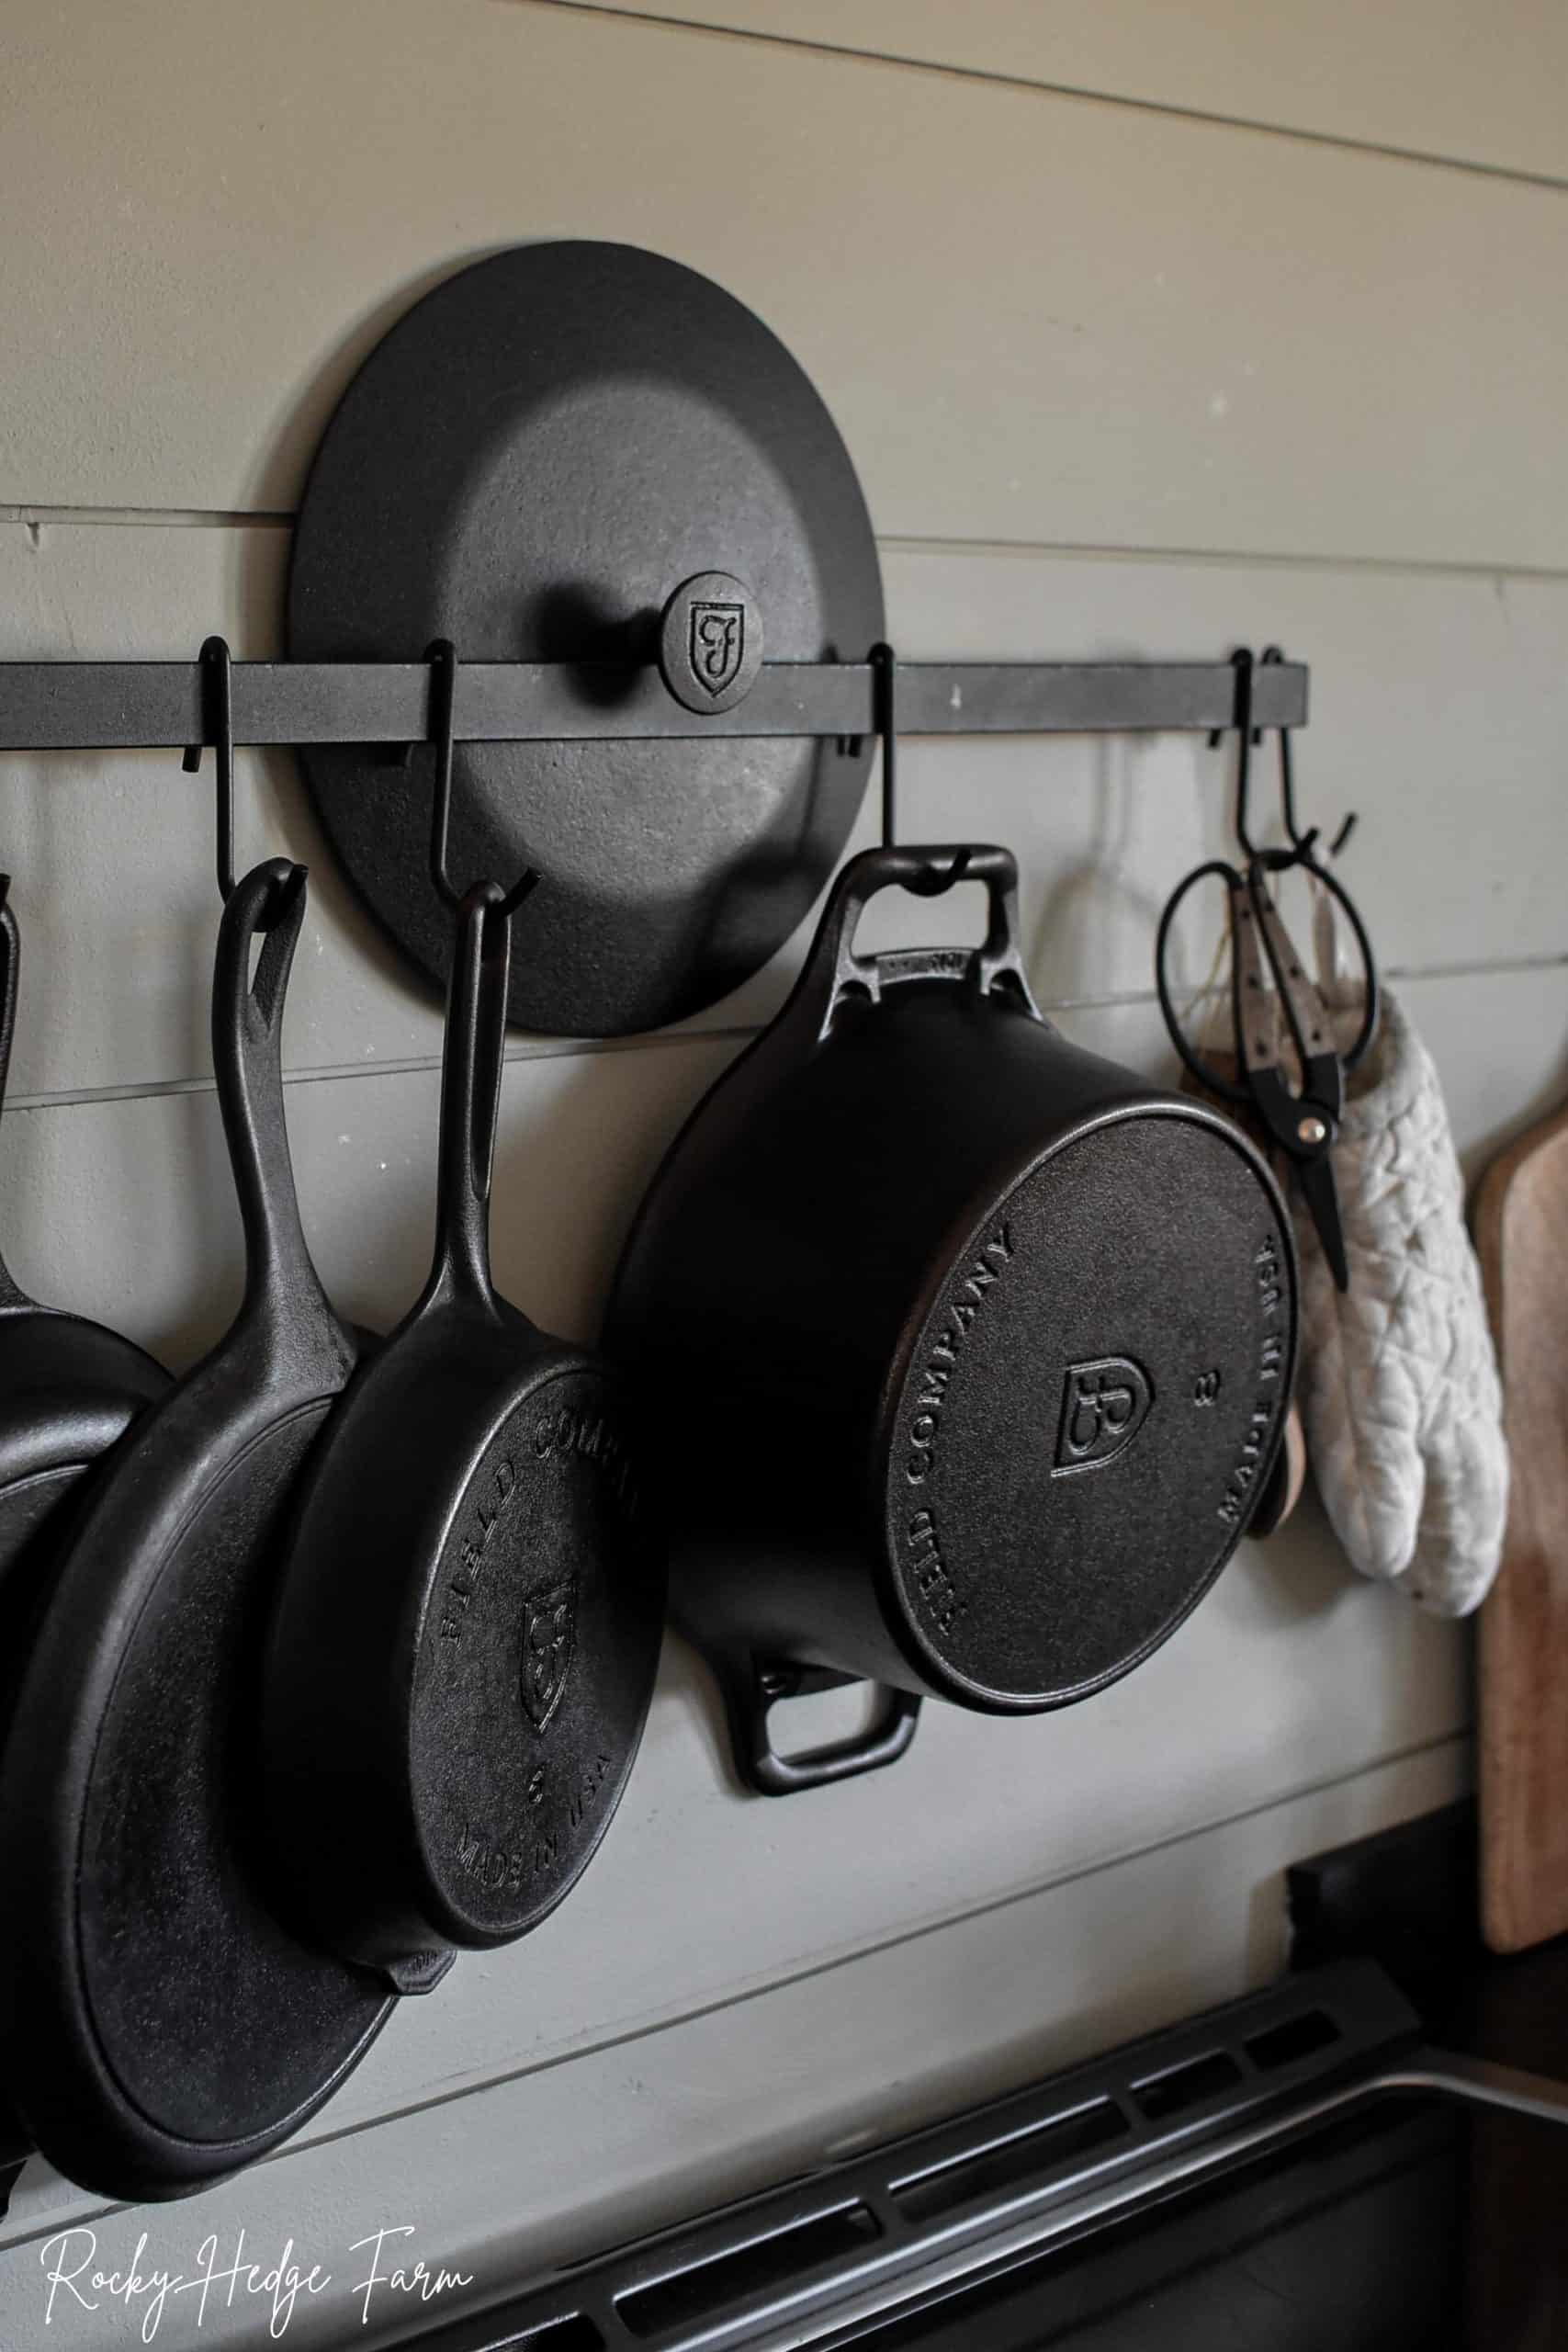 https://erdtknyop8g.exactdn.com/wp-content/uploads/2022/02/How-to-Store-Cast-Iron-Pans-scaled.jpg?strip=all&lossy=1&fit=683%2C1024&ssl=1